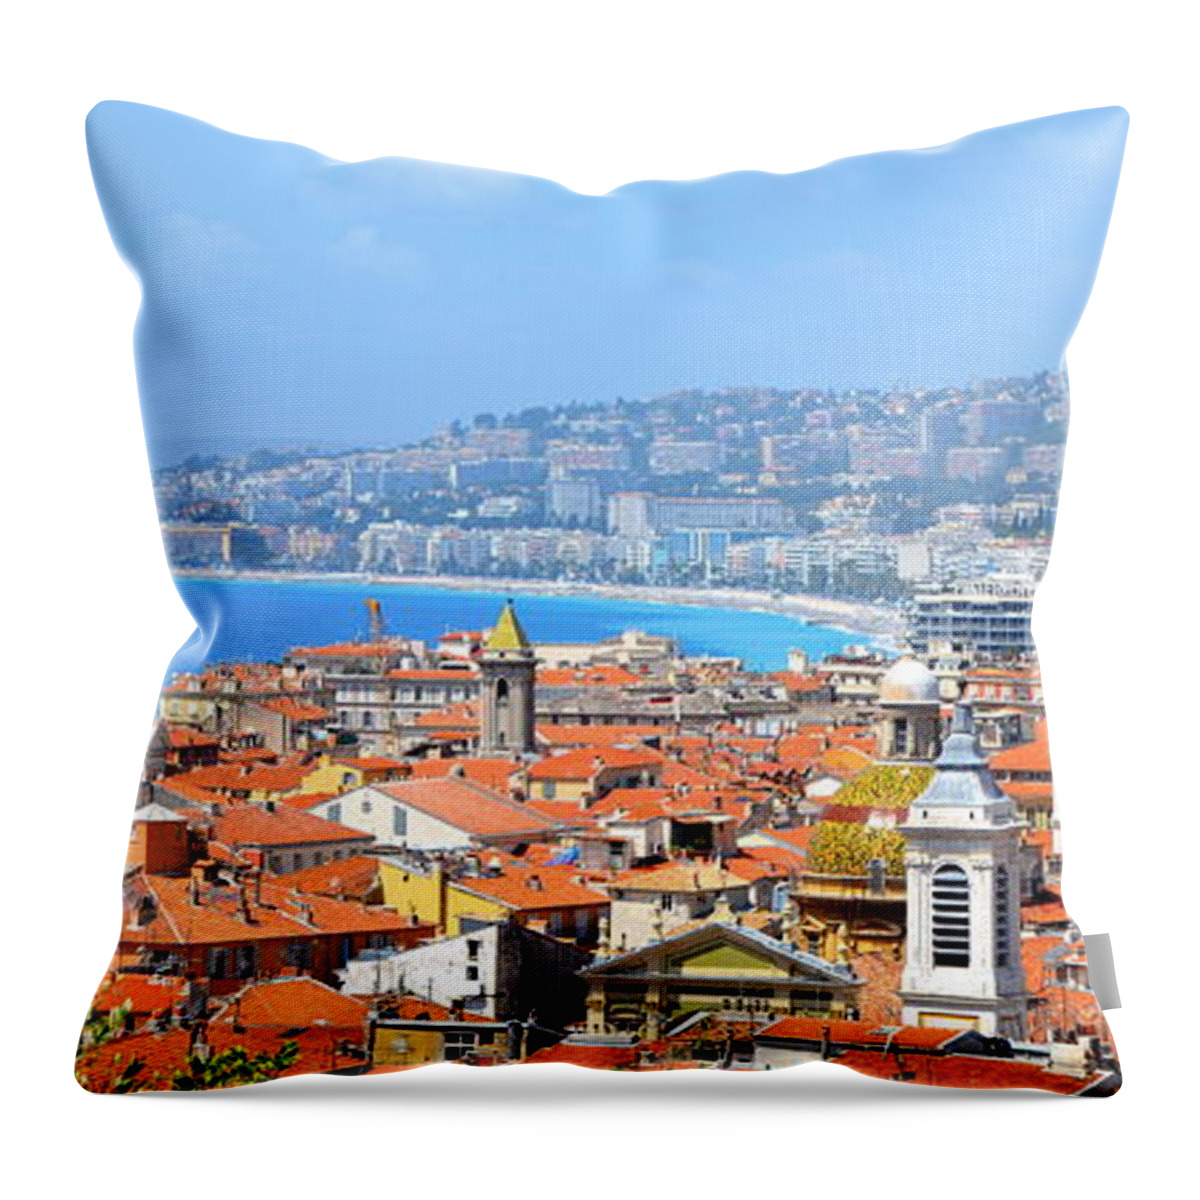 Nice Throw Pillow featuring the photograph Terra Cotta Roofs by Corinne Rhode